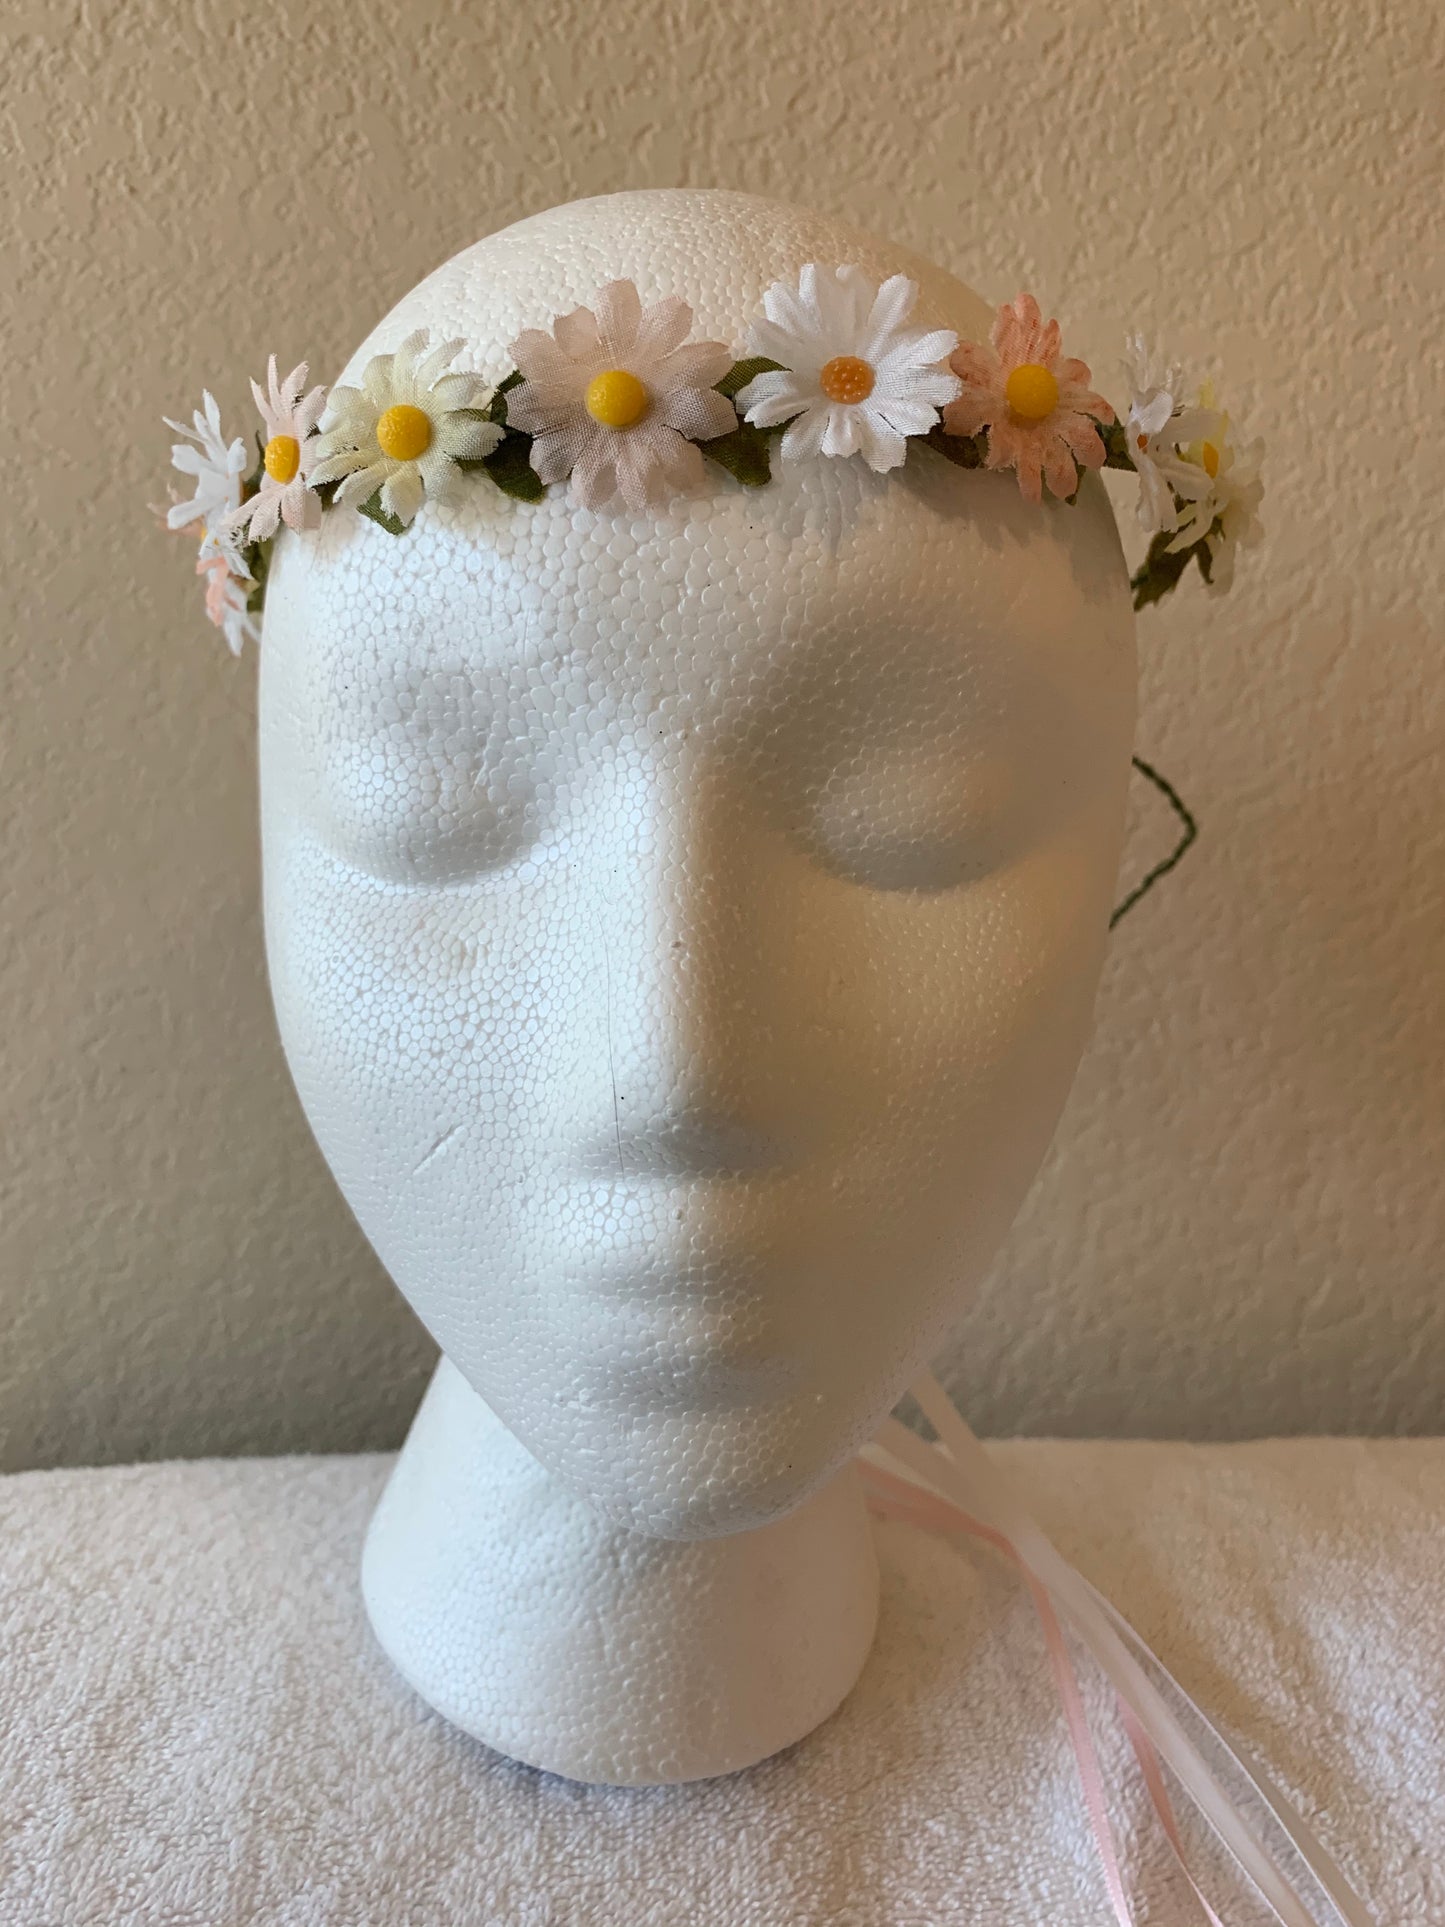 Extra Small Wreath - Pink, White, and Yellow Daisies